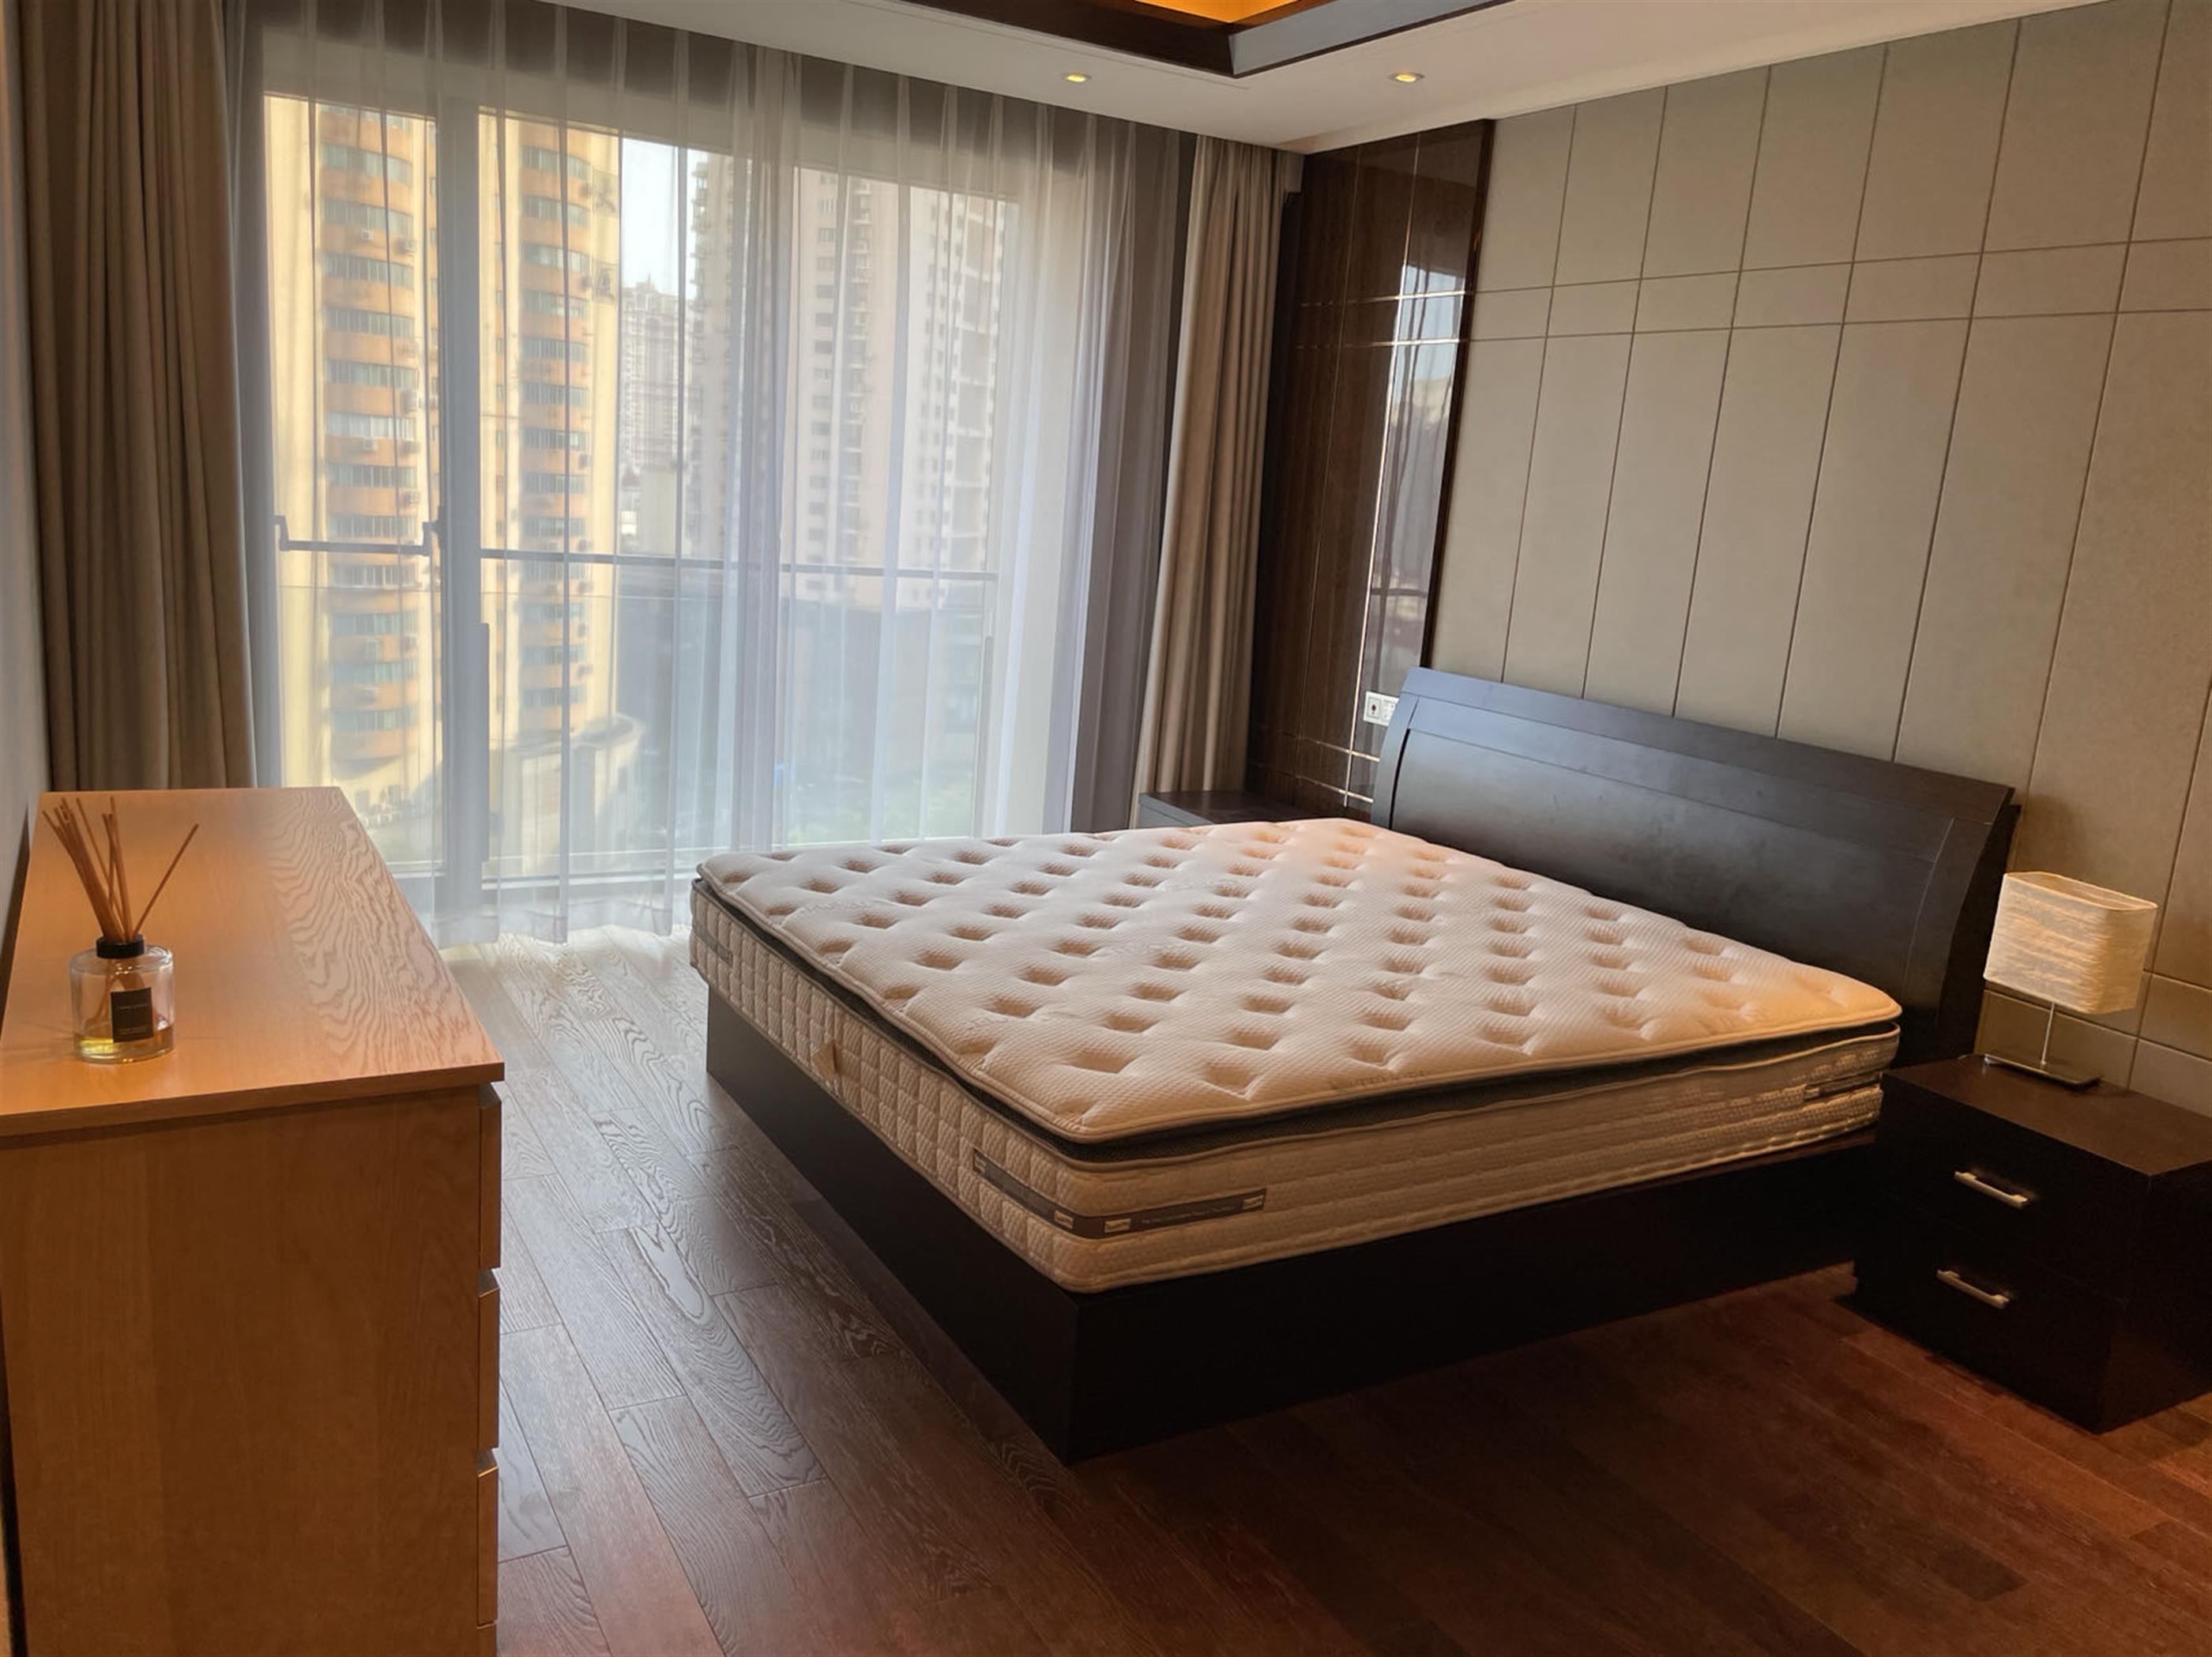 bedroon Deluxe Spacious Classic 3BR Apartment for Rent in Shanghai’s Xintiandi Neighborhood